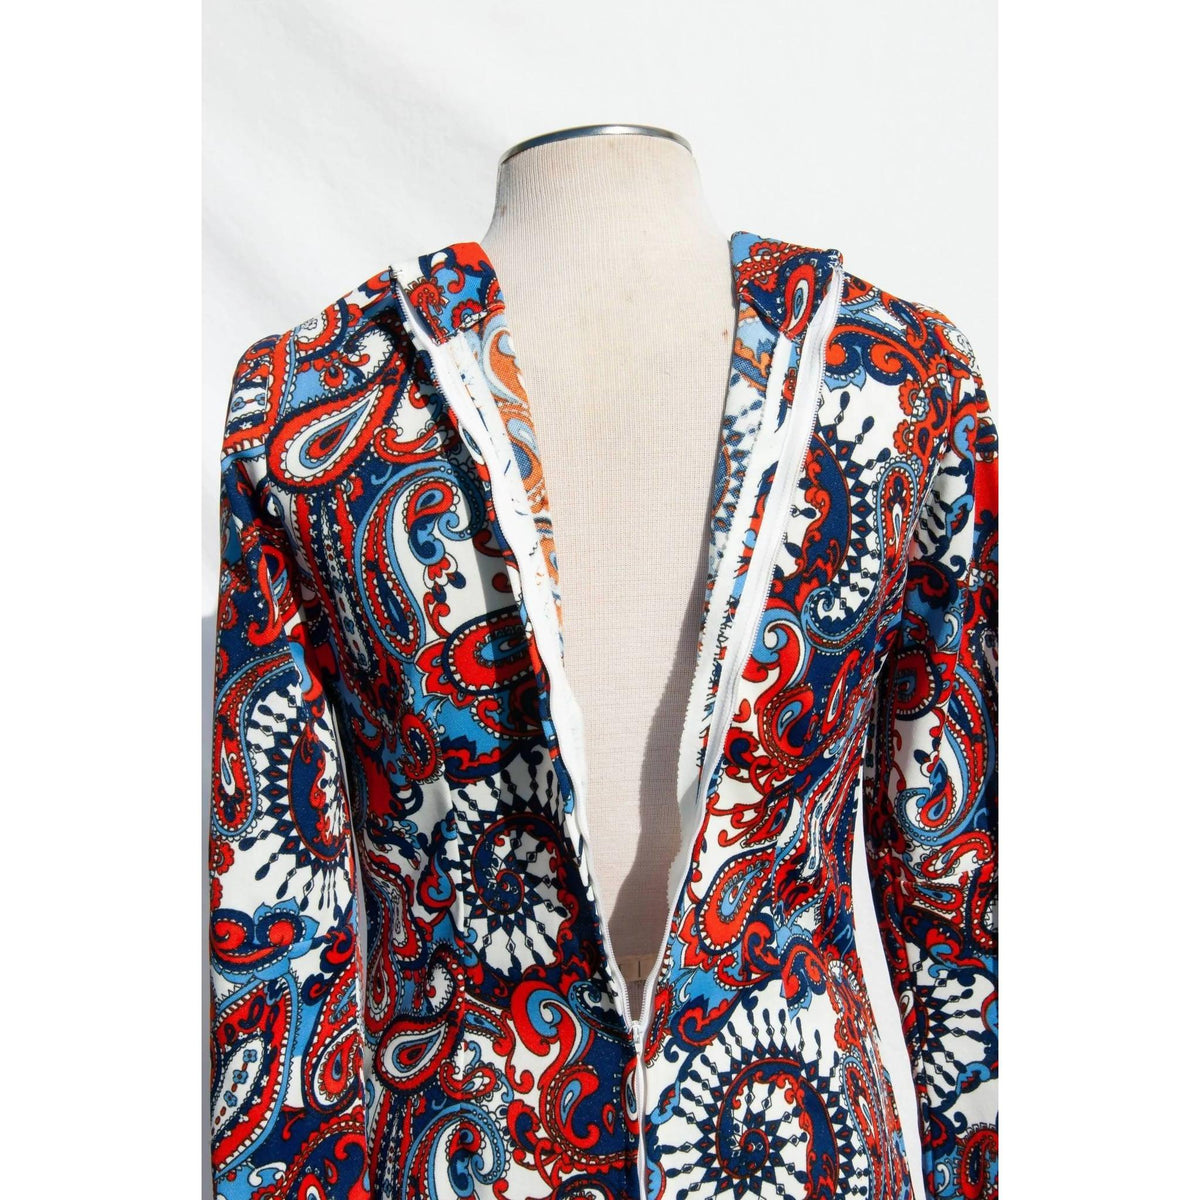 Pre-Owned 1970's Vintage Paisley Print Tunic Top | Size M/L - theREMODA